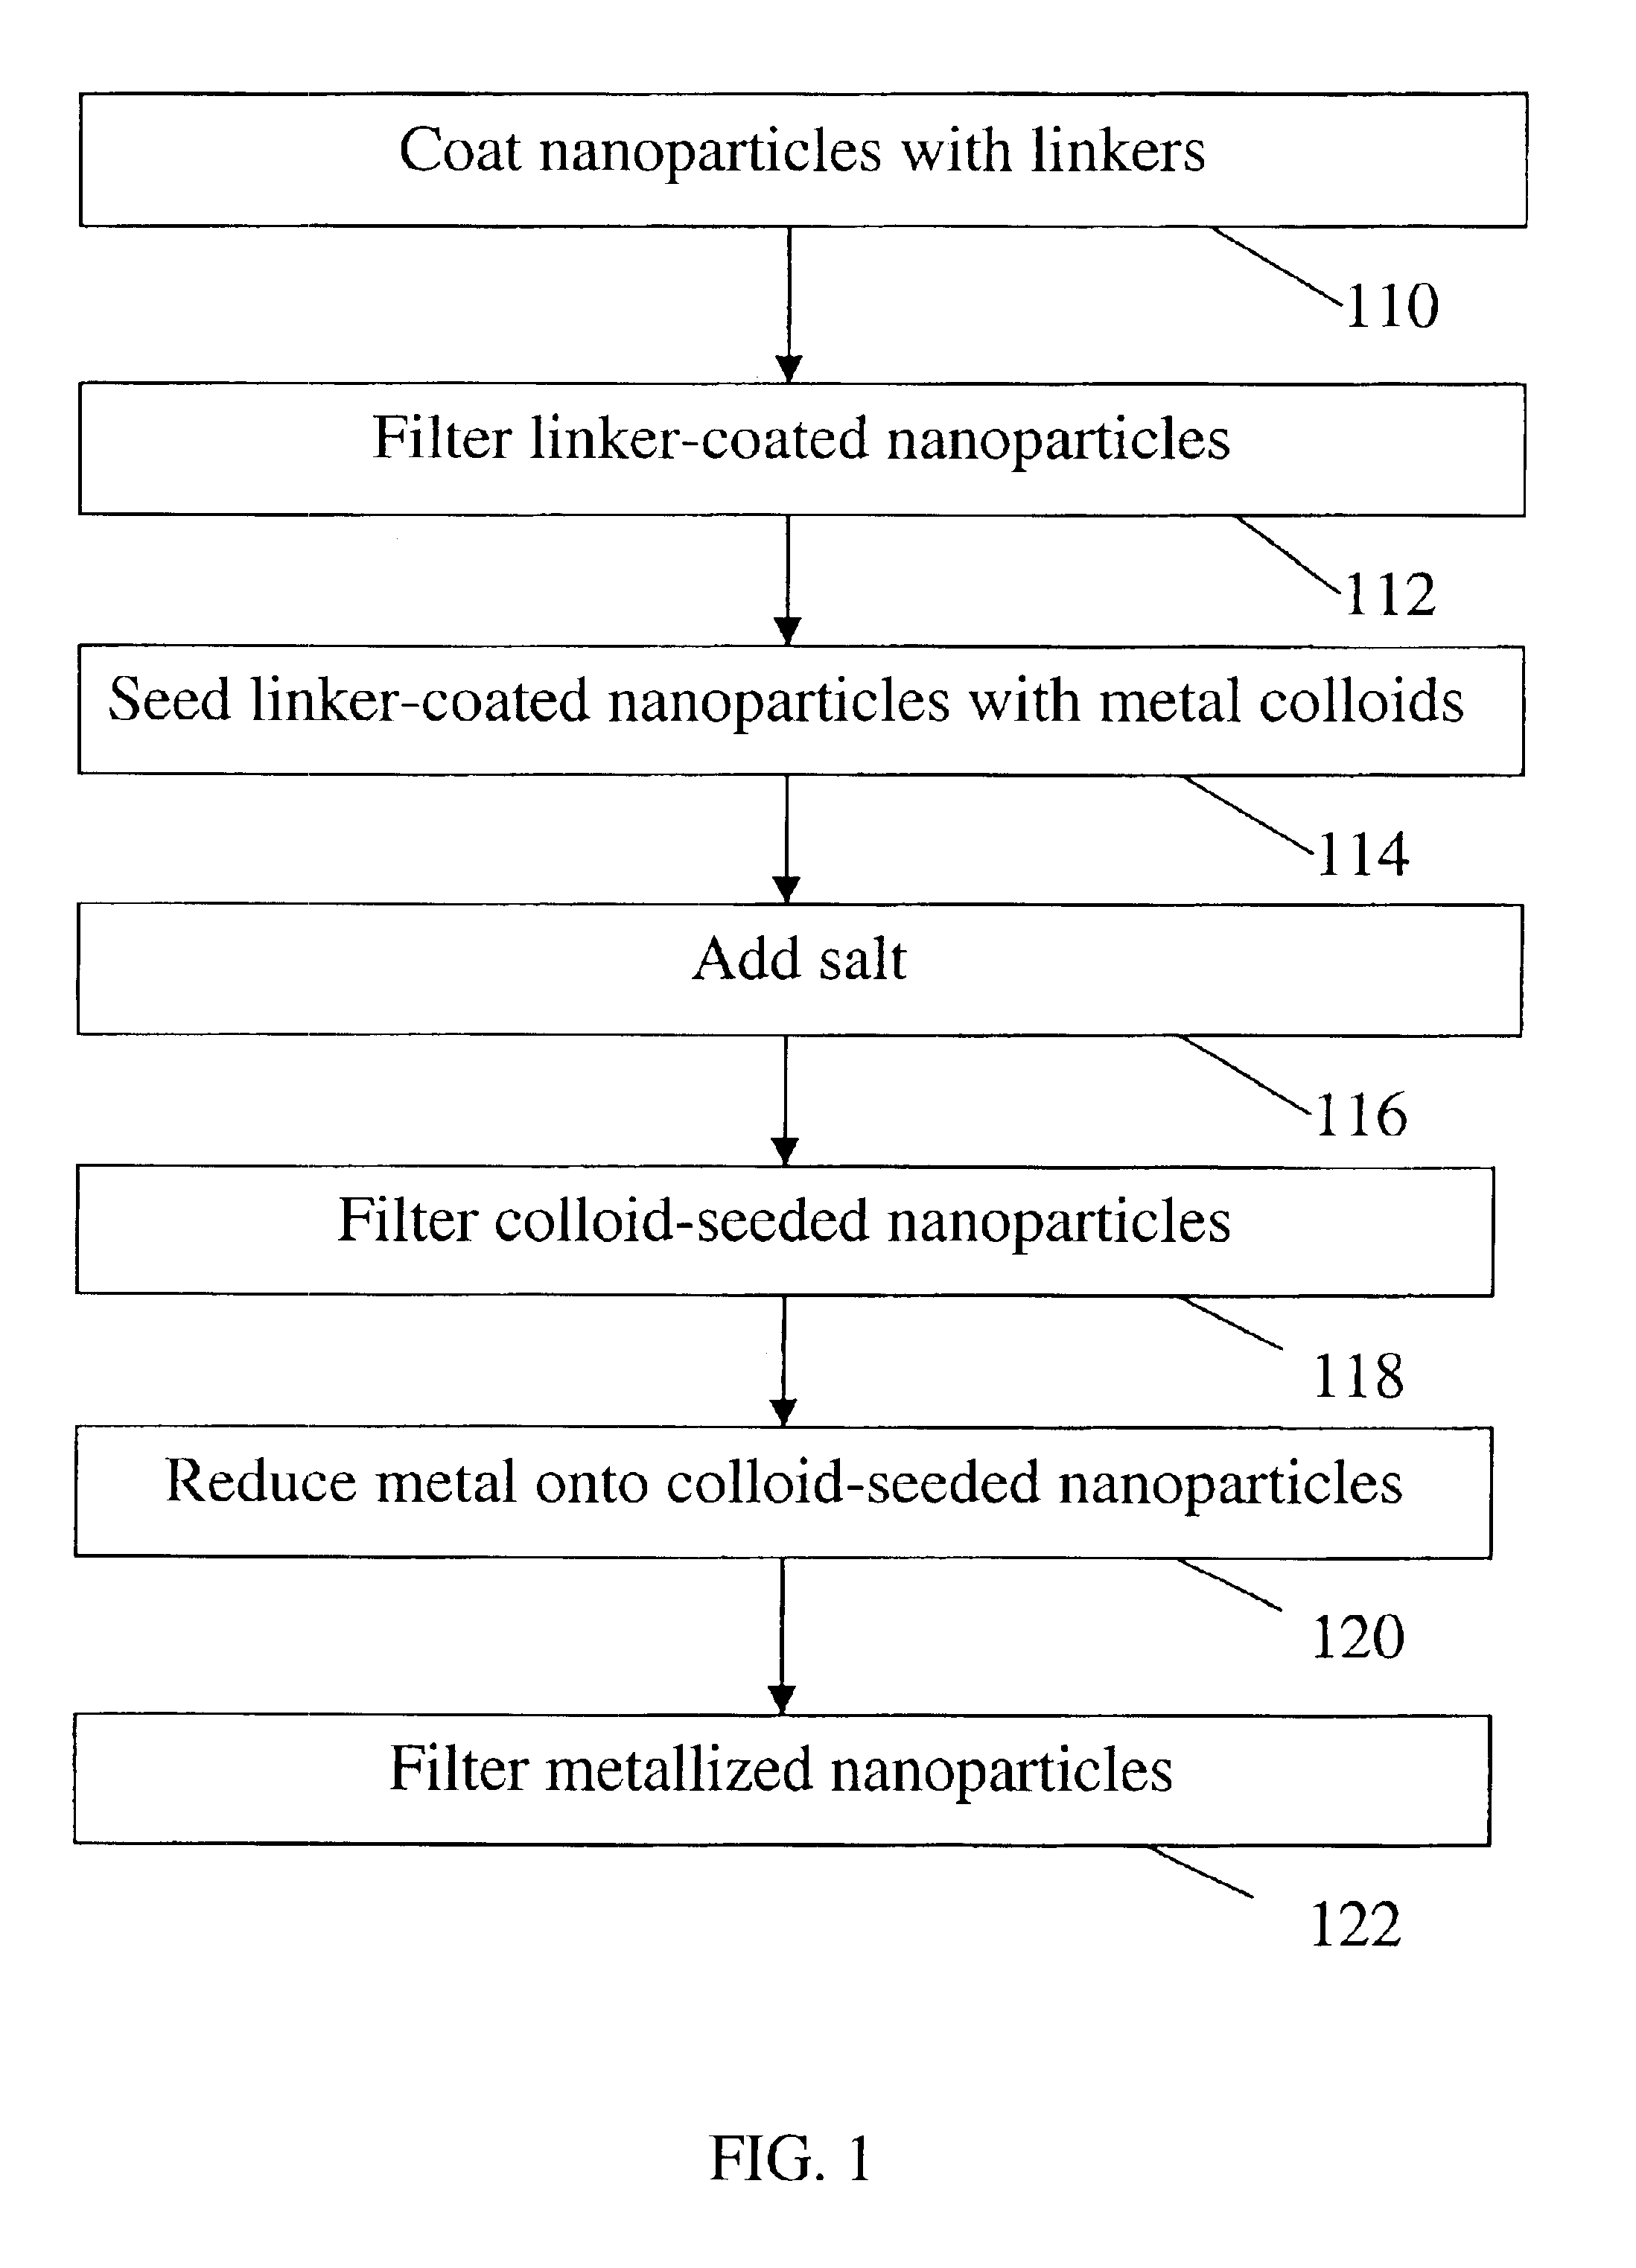 Method for scalable production of nanoshells using salt assisted purification of intermediate colloid-seeded nanoparticles